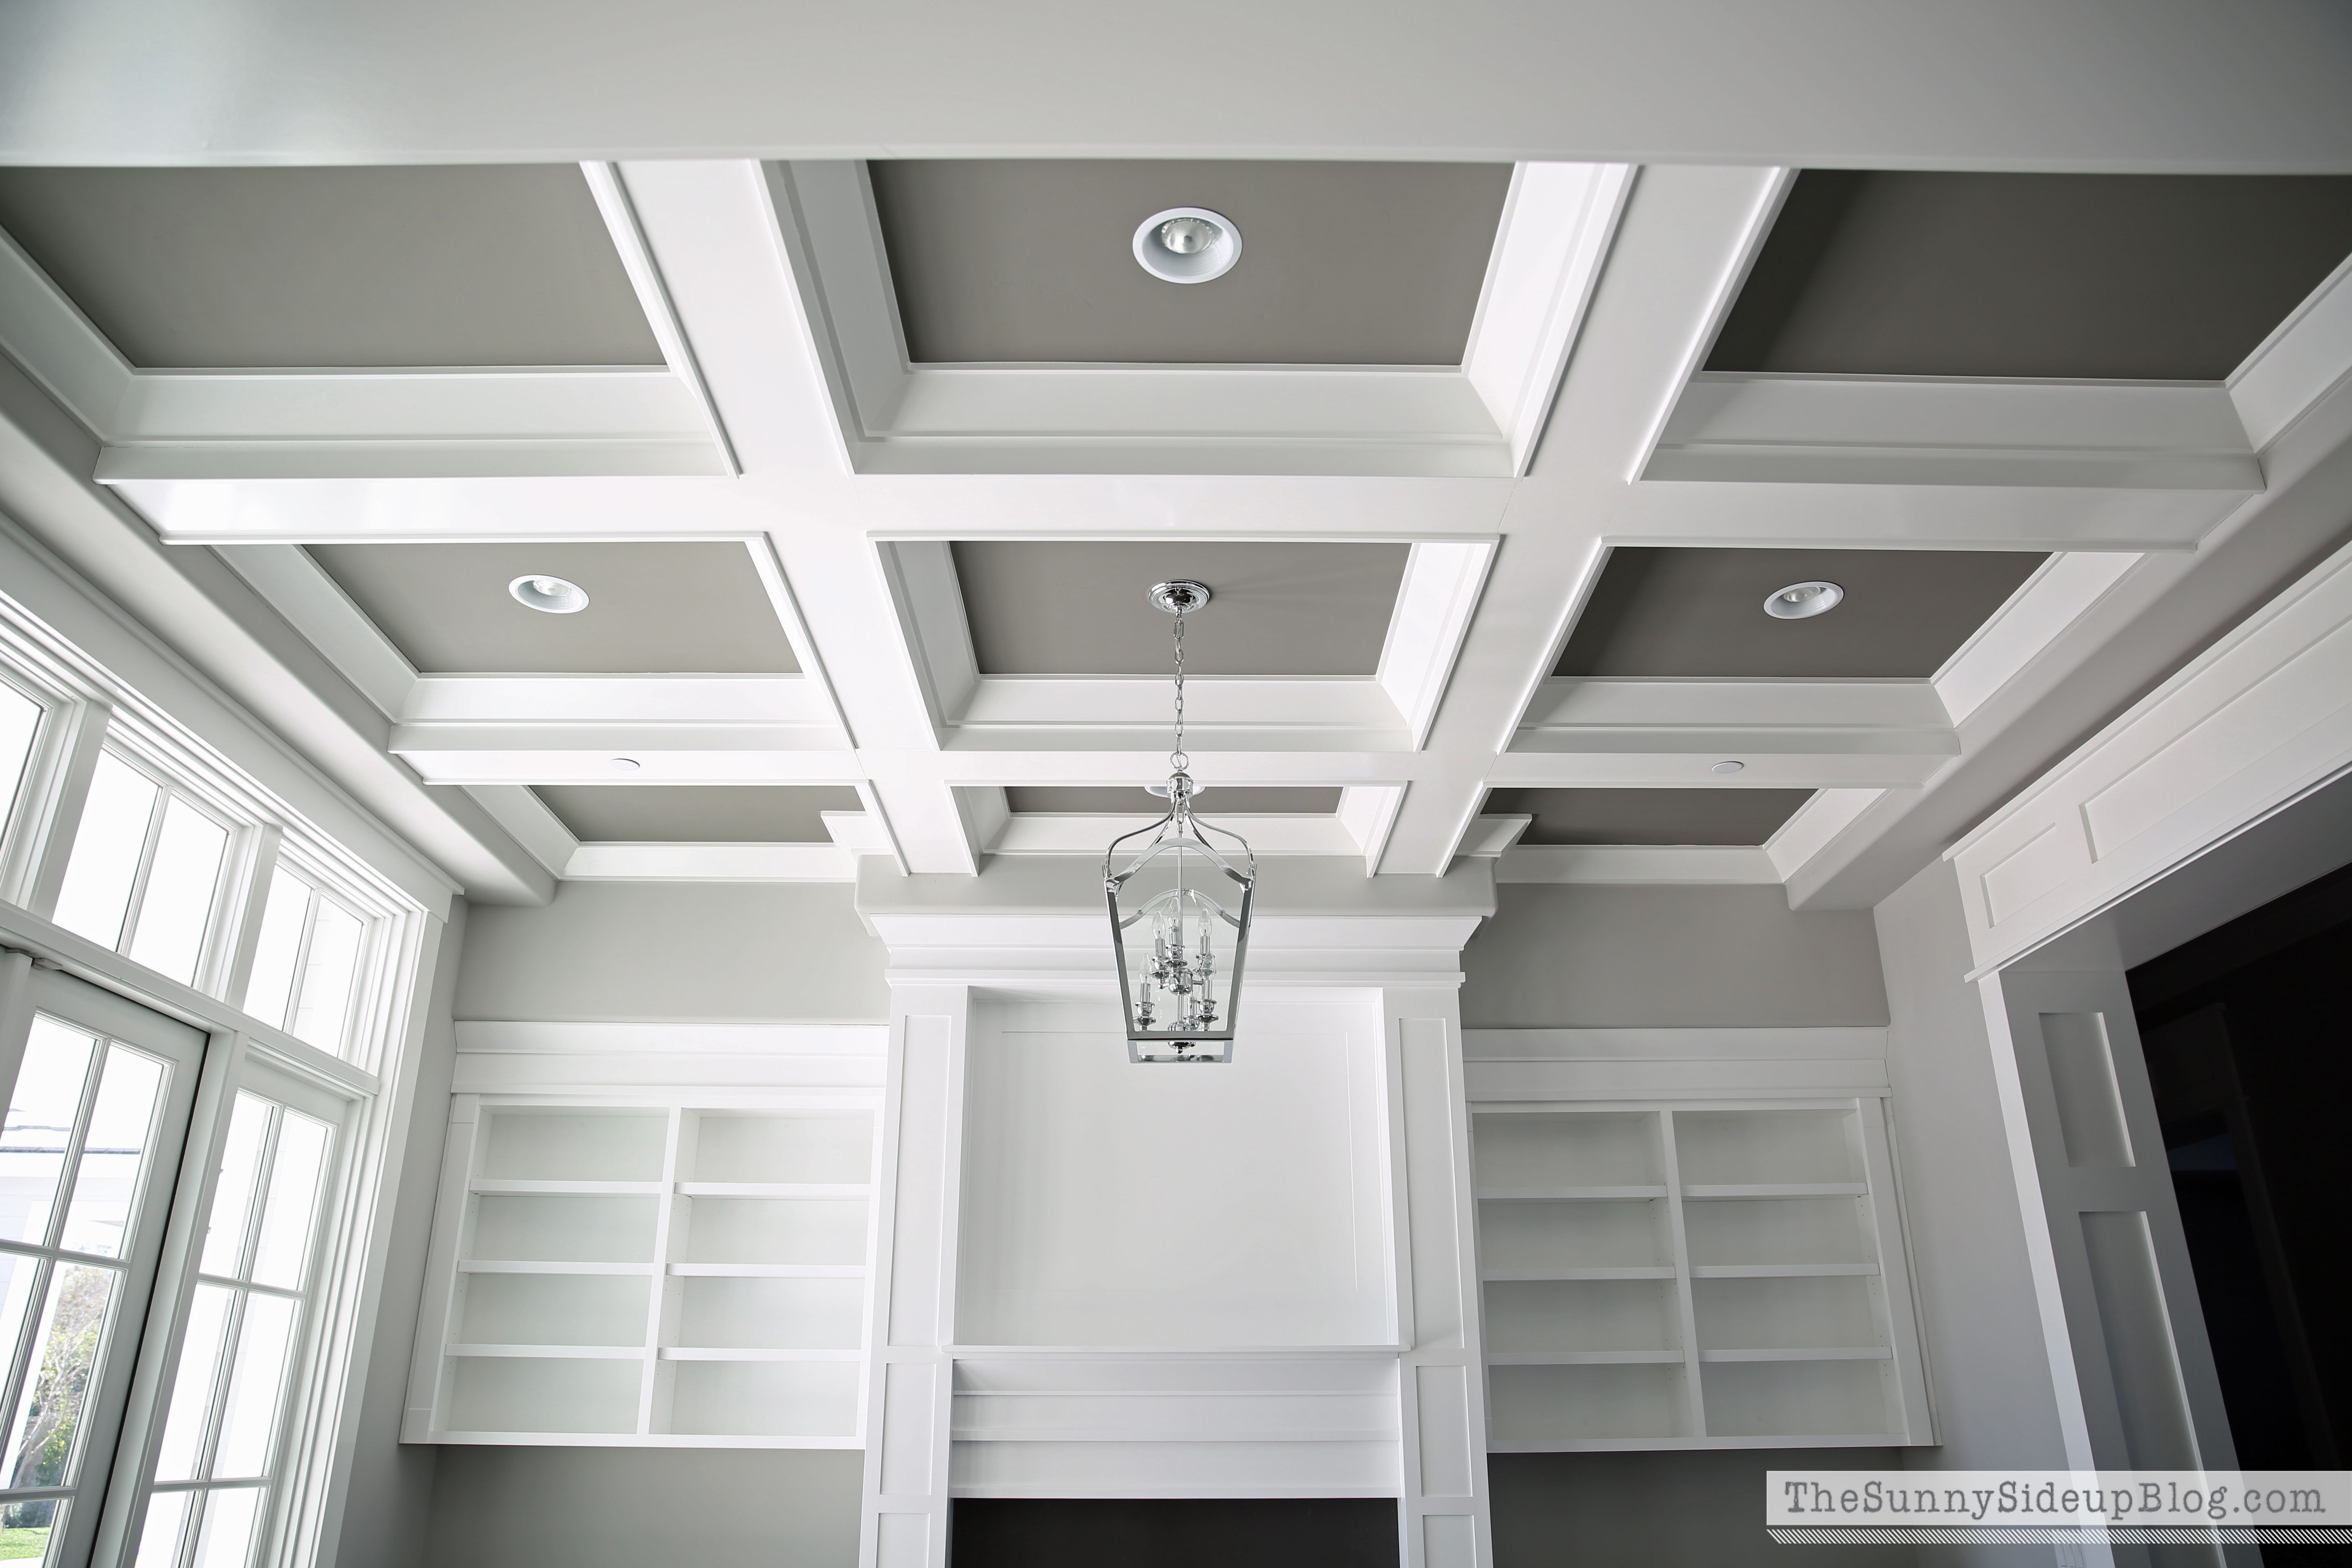 Coffered Ceiling Redflagdeals Com Forums, How Much Does It Cost To Install A Coffered Ceiling